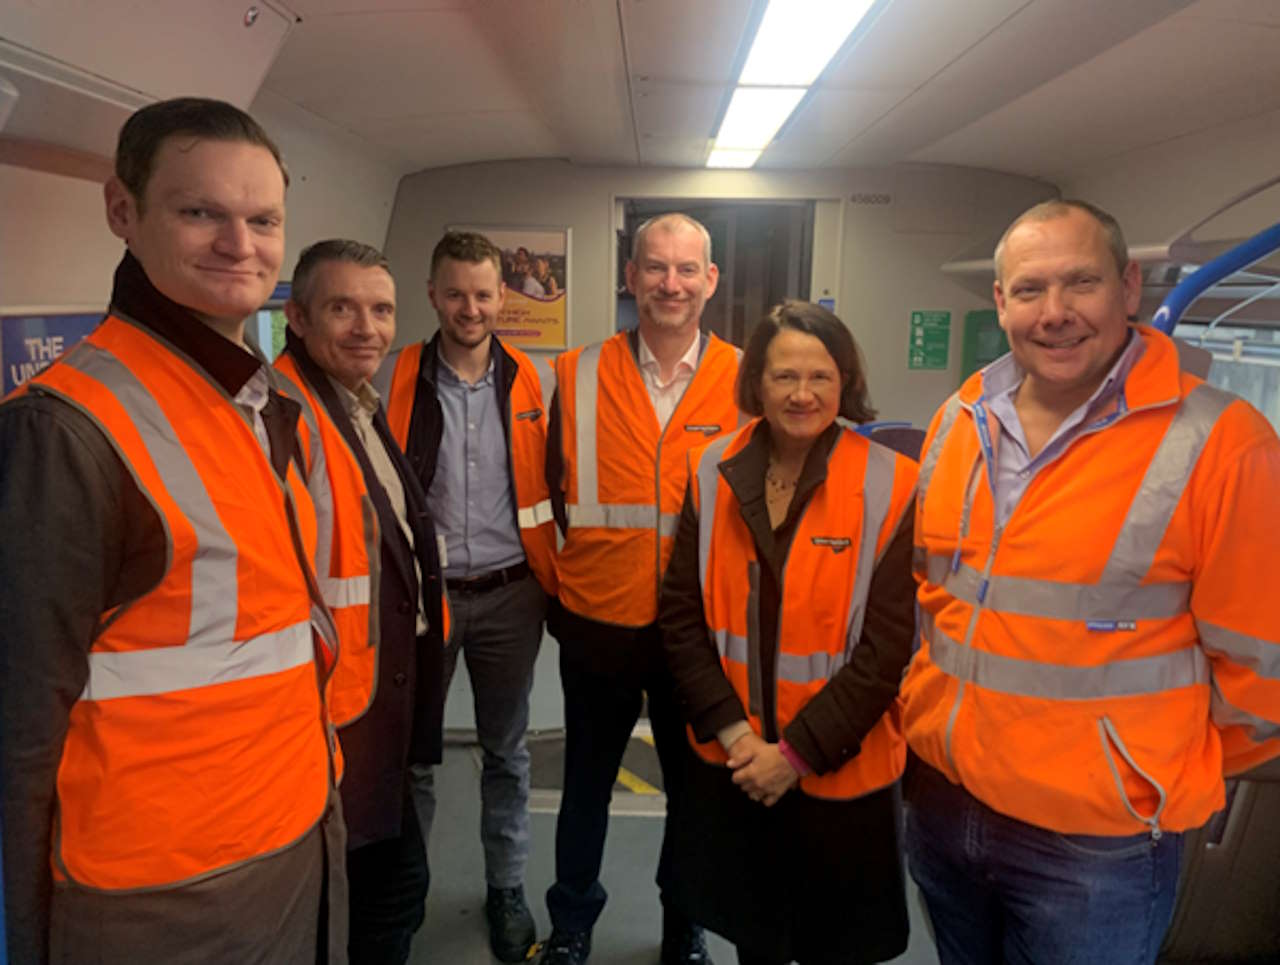 North London MP checks in at her local rail depot